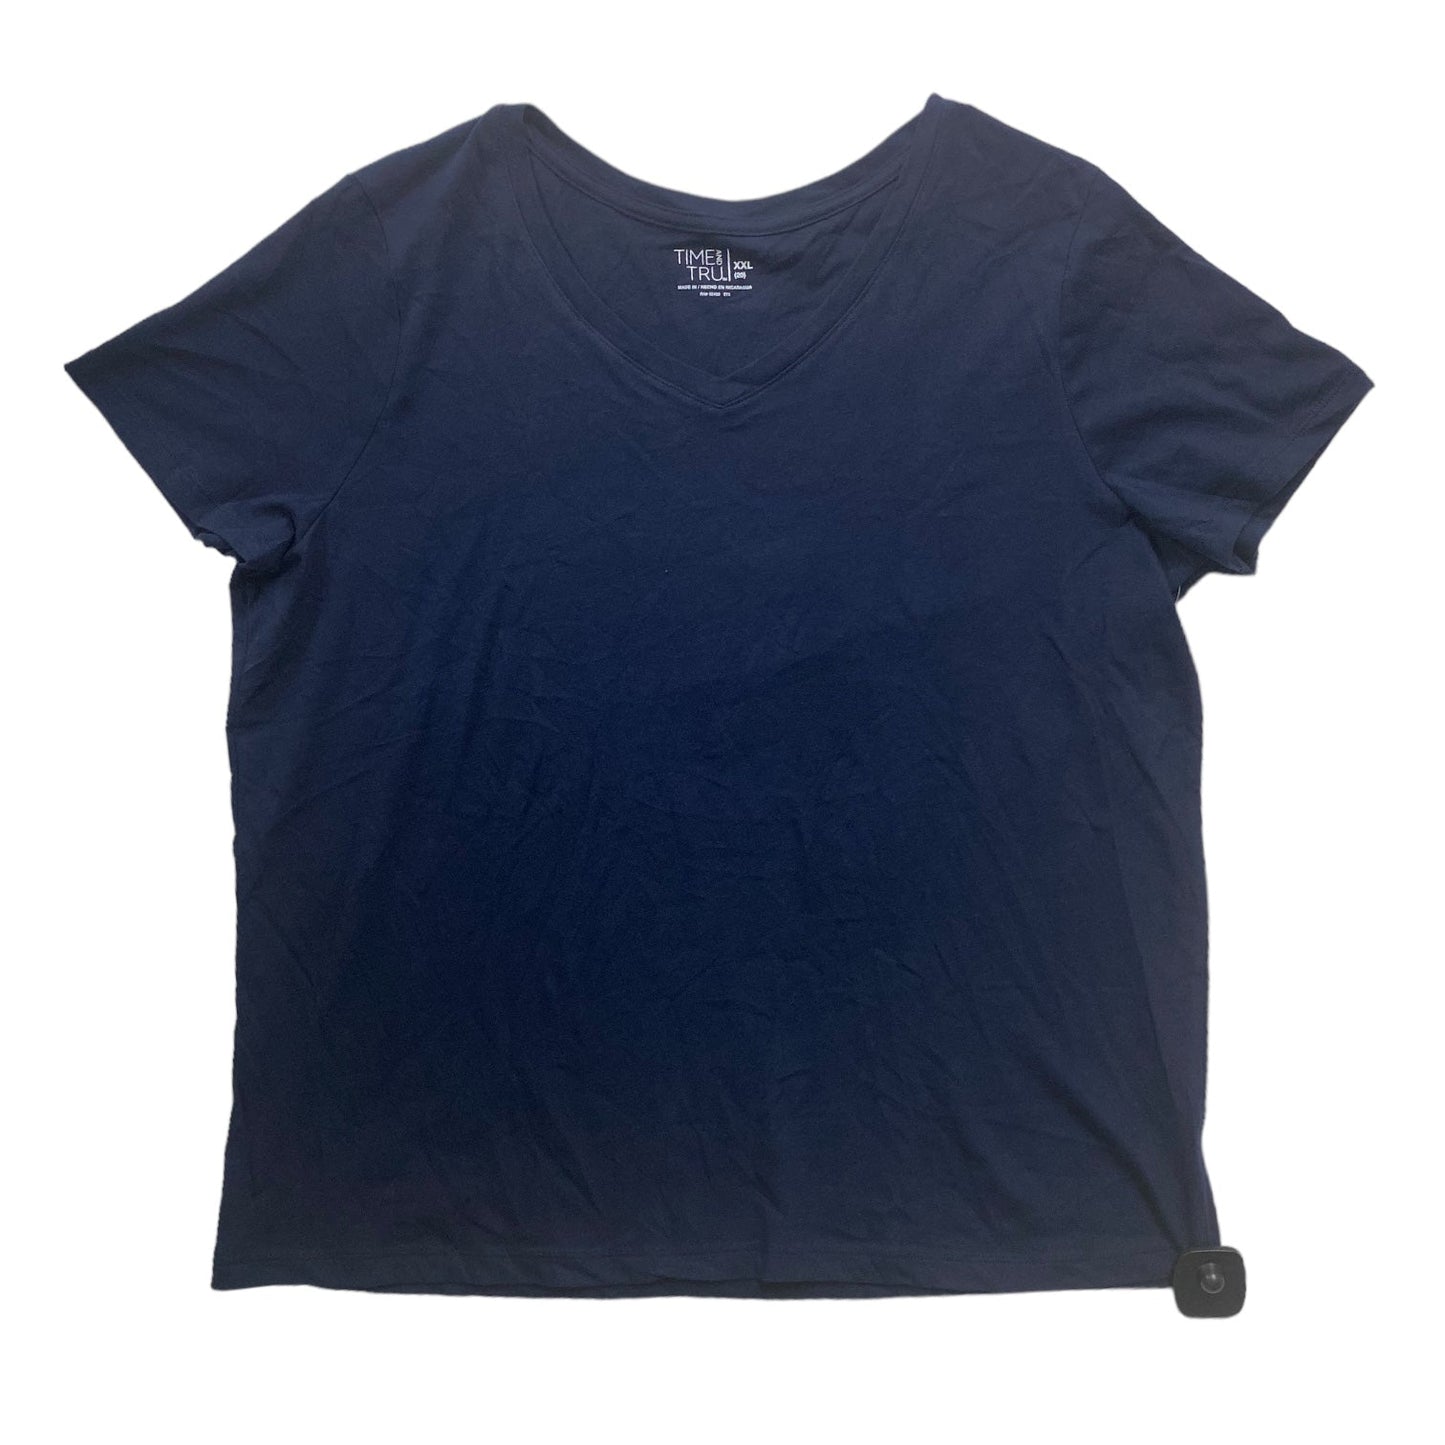 Navy Top Short Sleeve Time And Tru, Size 2x